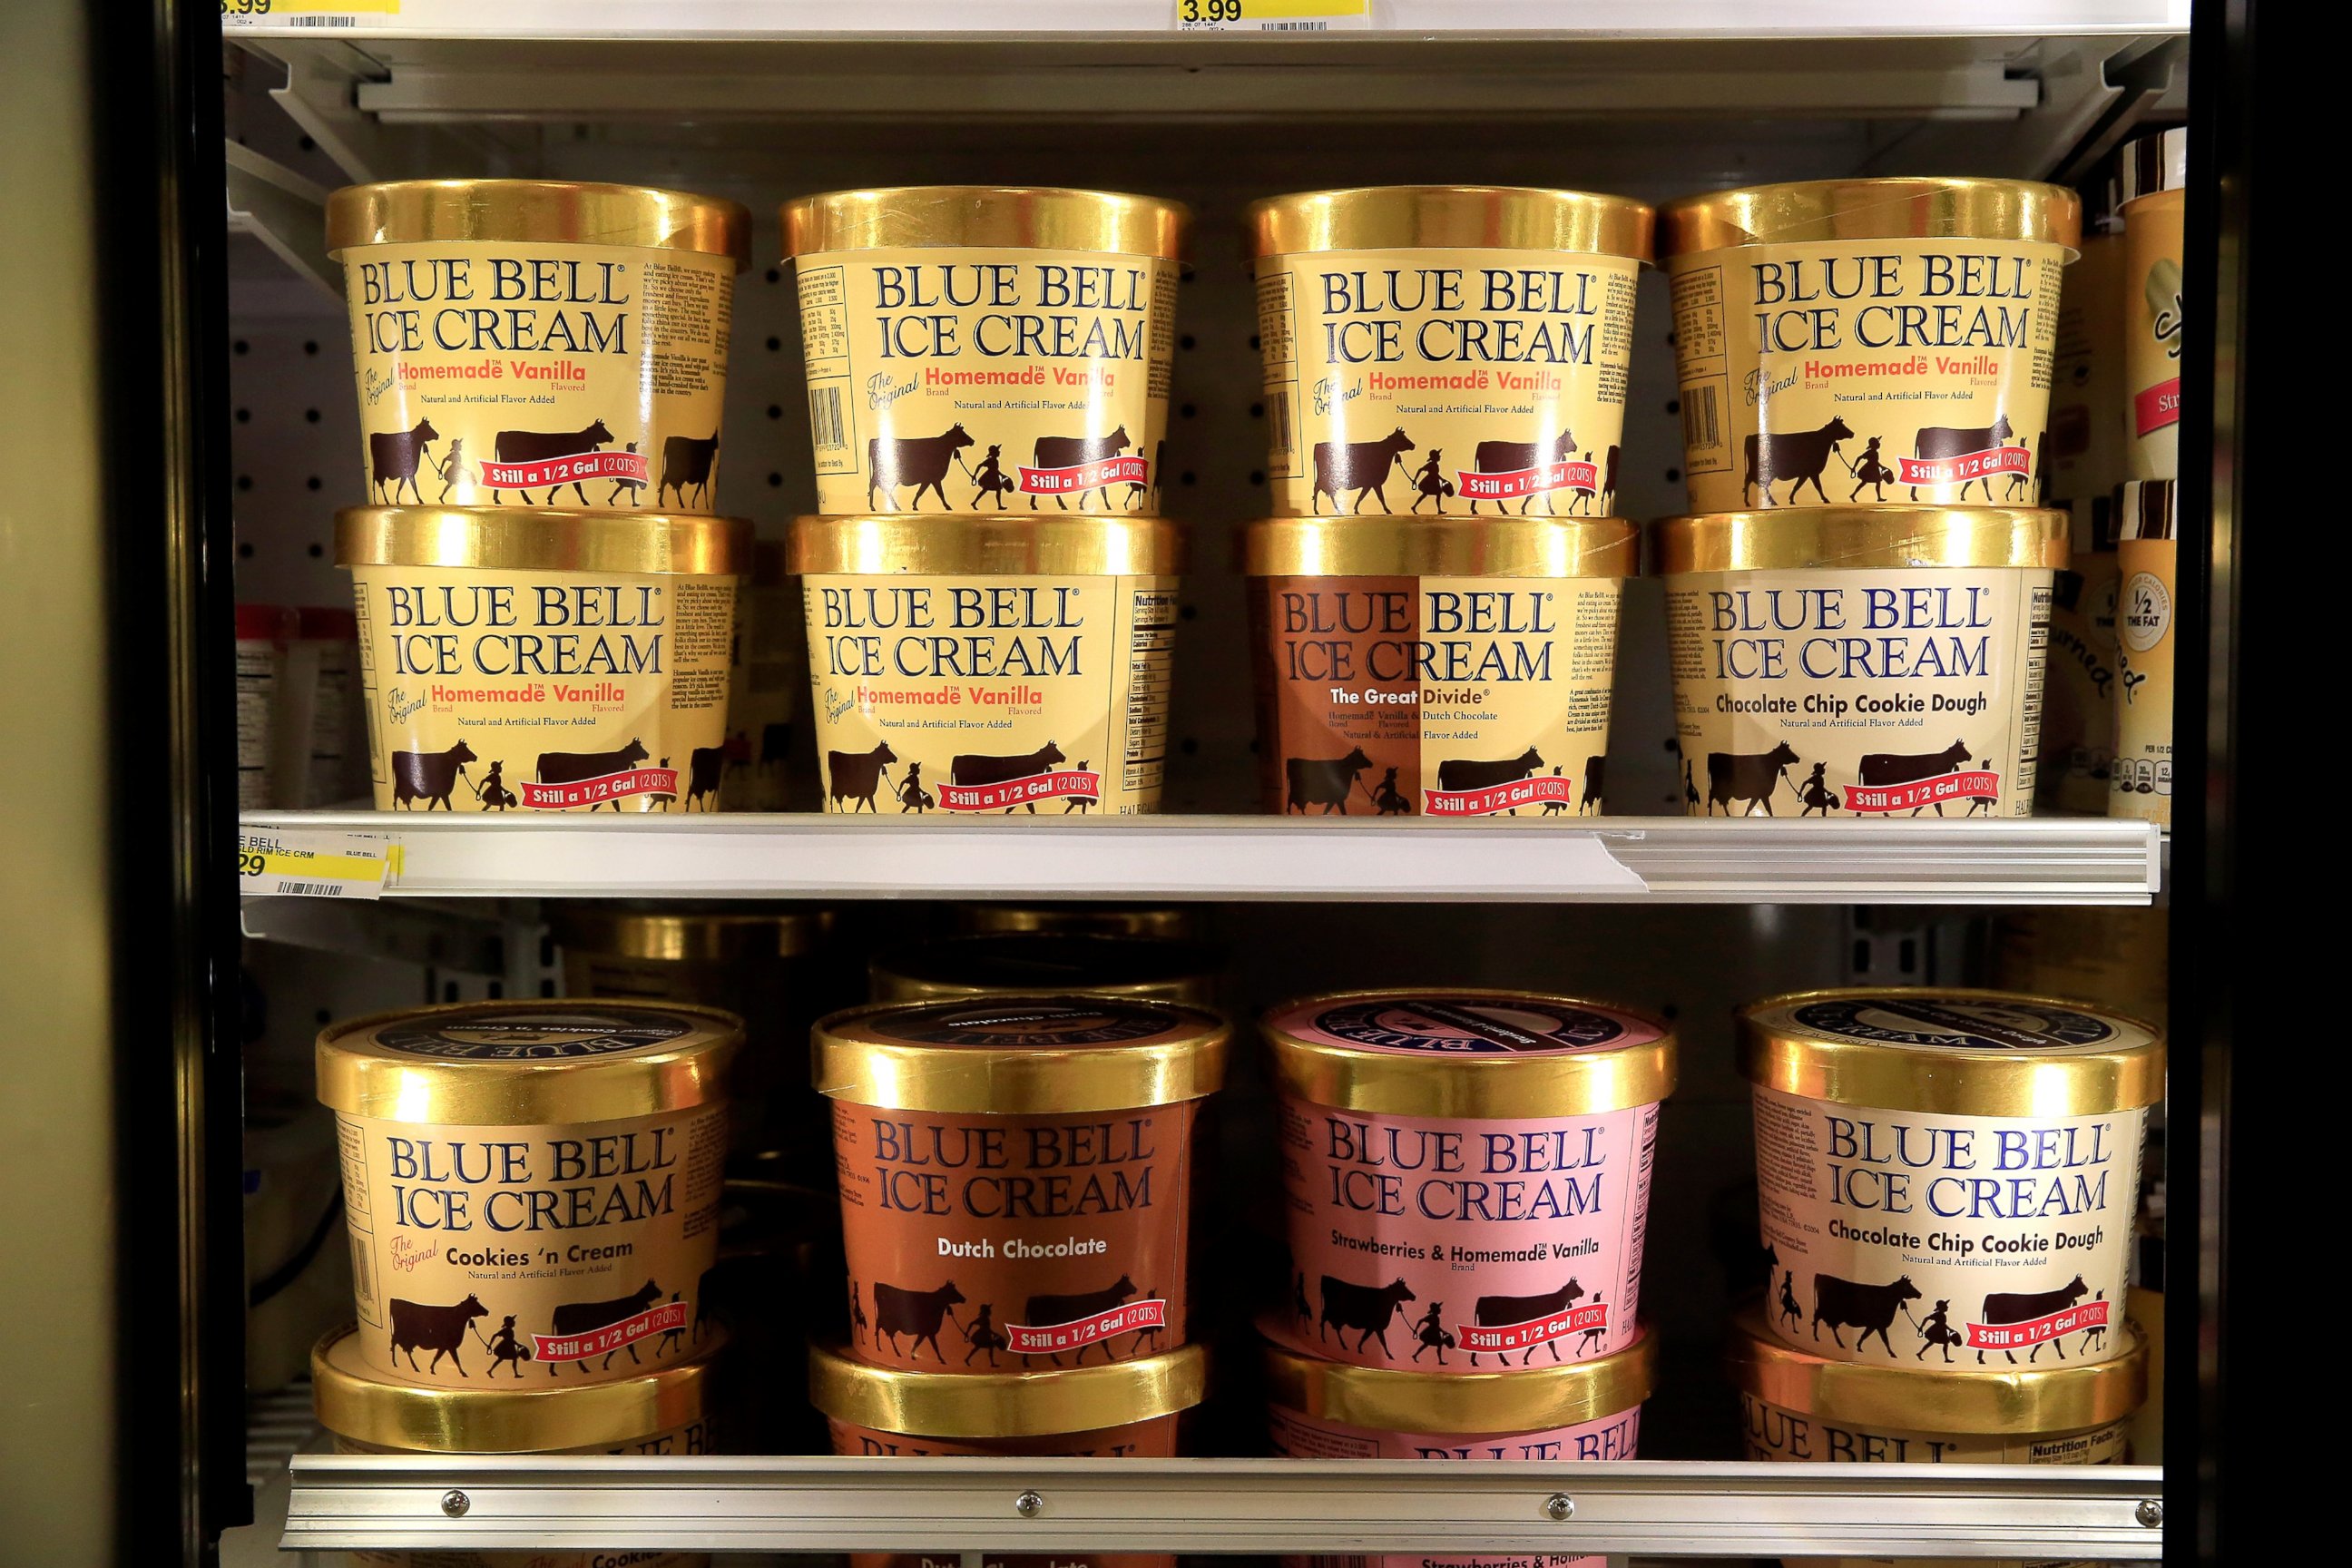 PHOTO: Blue Bell Ice Cream is seen on shelves of an Overland Park grocery store prior to being removed on April 21, 2015 in Overland Park, Kansas. 